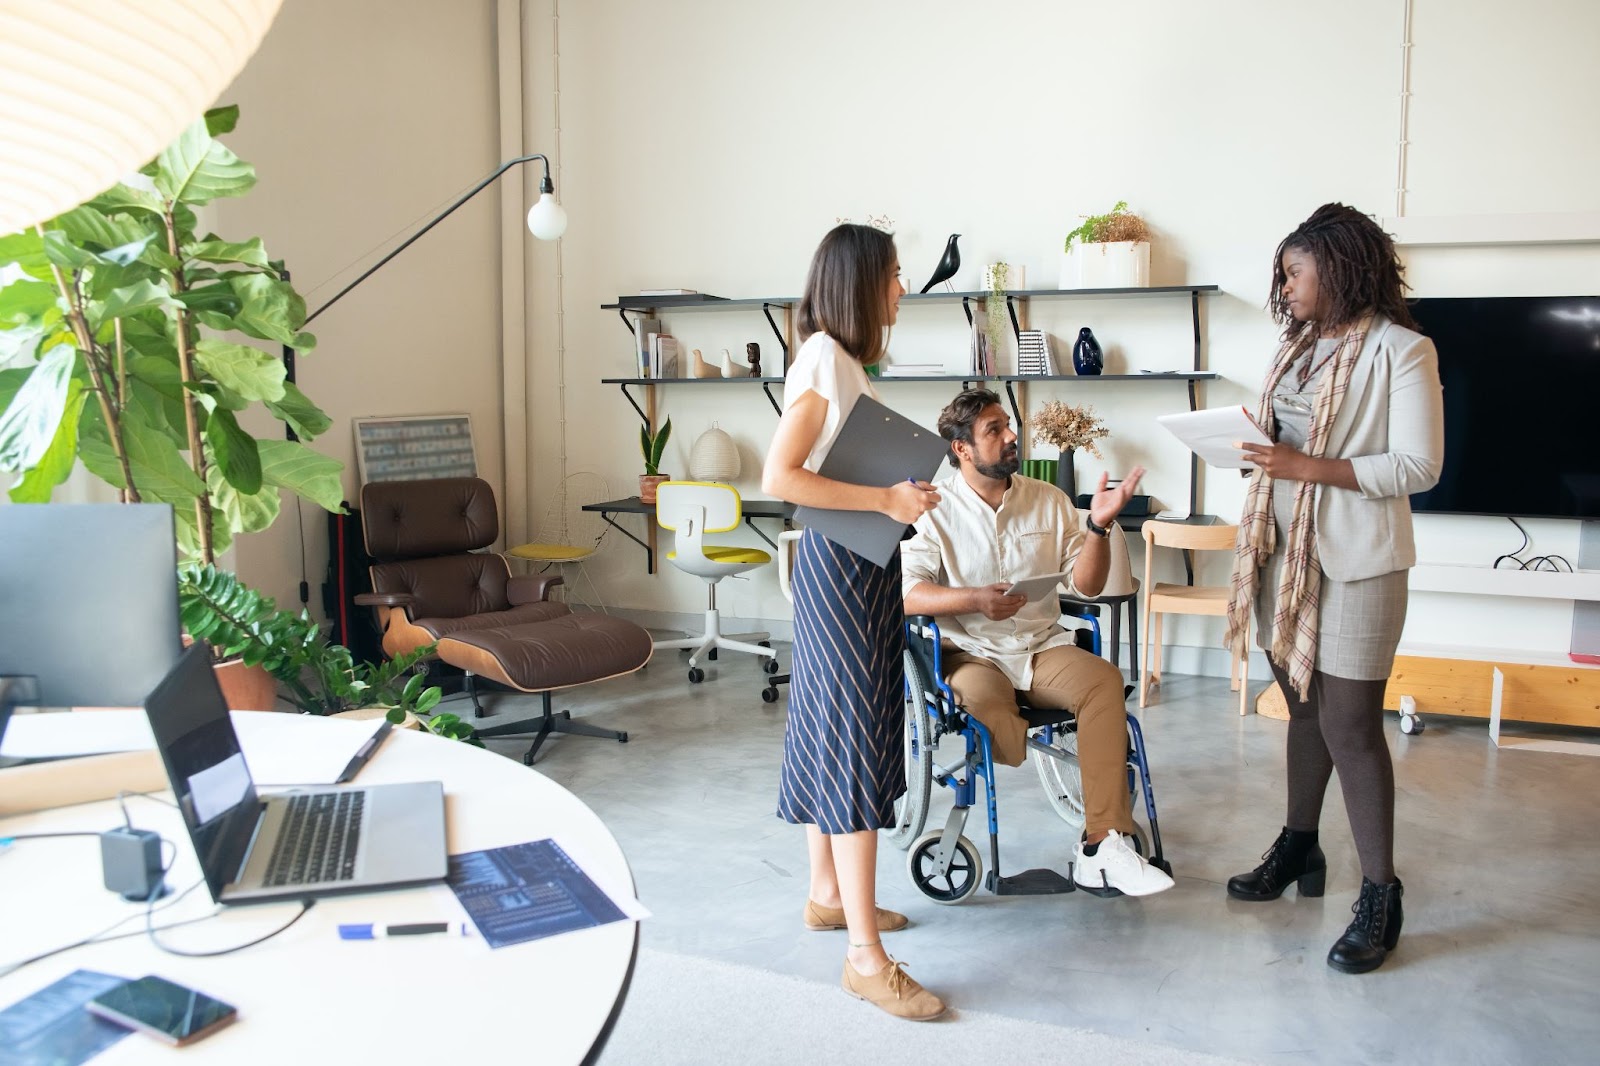 Three colleagues engaged in conversation in a modern and inclusive workspace